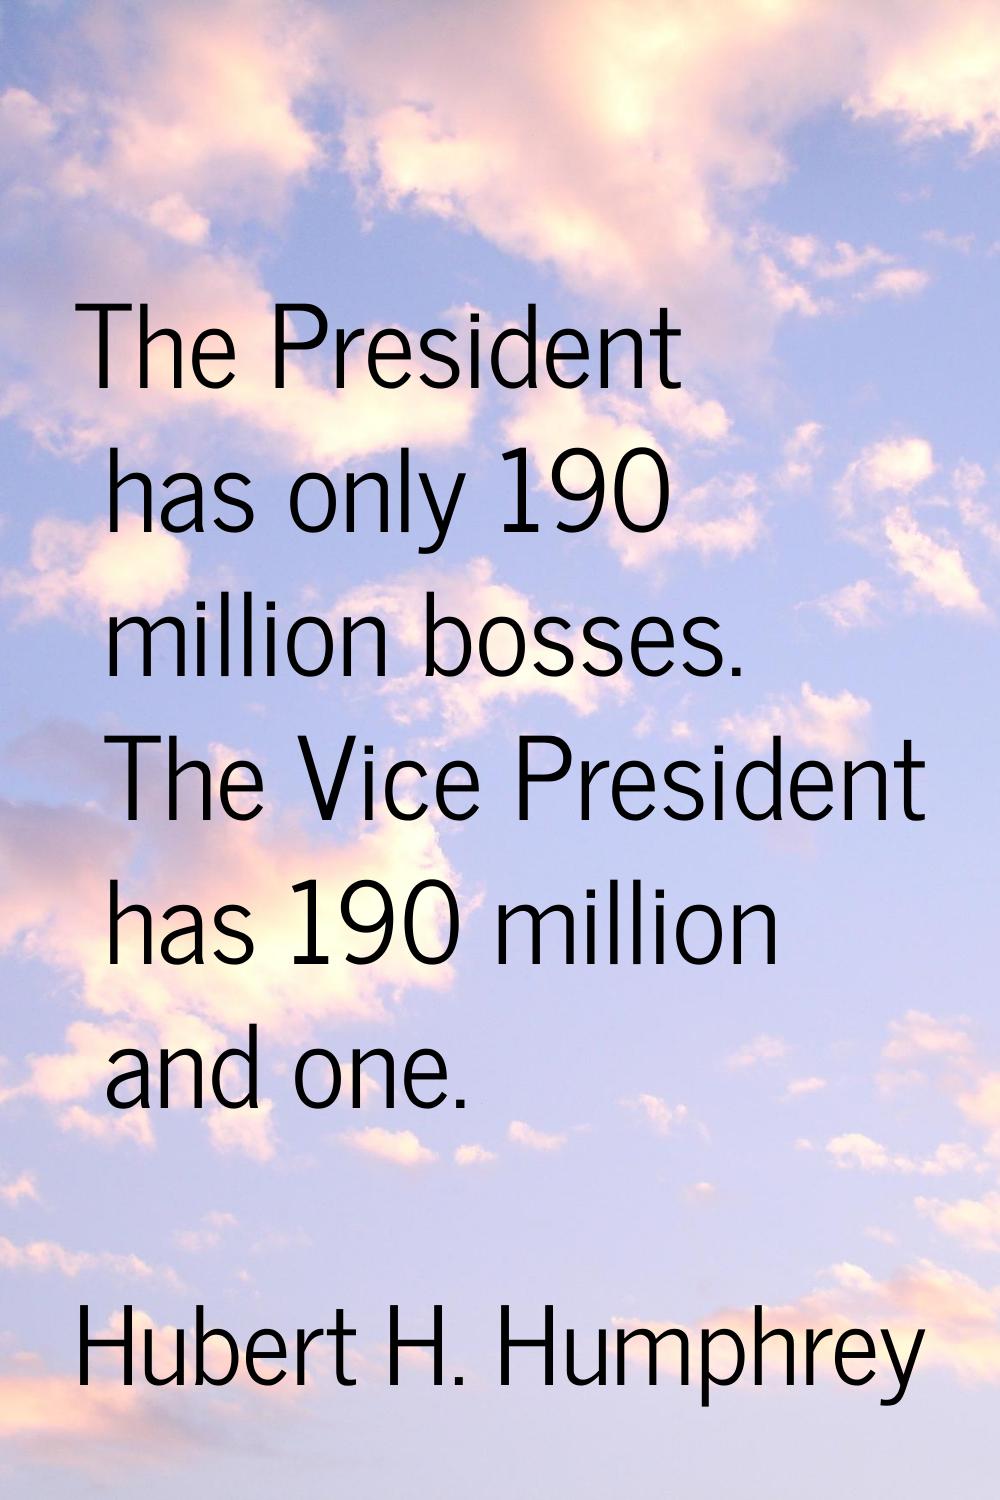 The President has only 190 million bosses. The Vice President has 190 million and one.